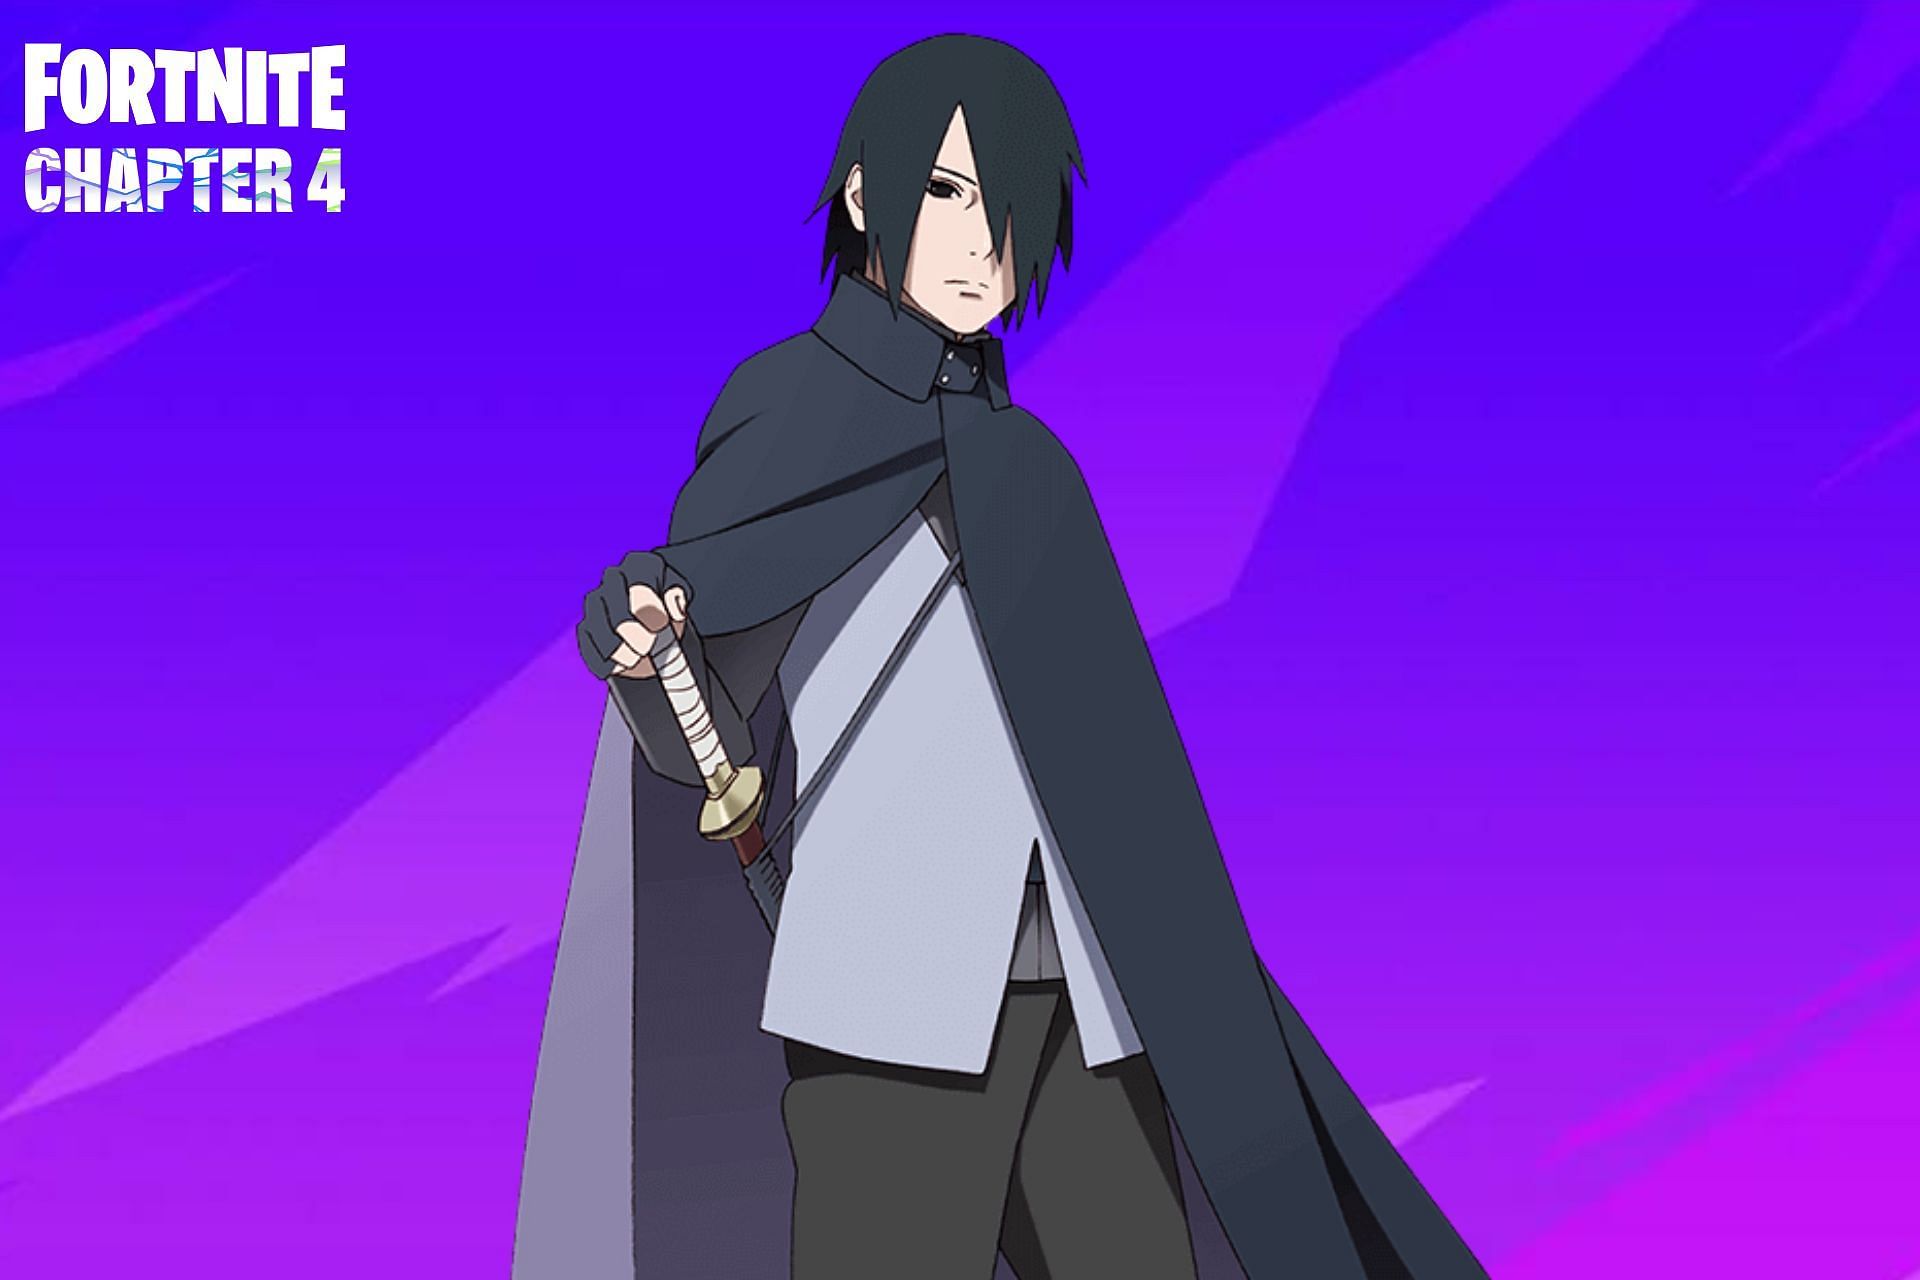 Fortnite x Naruto to likely bring adult version of Sasuke in Chapter 4